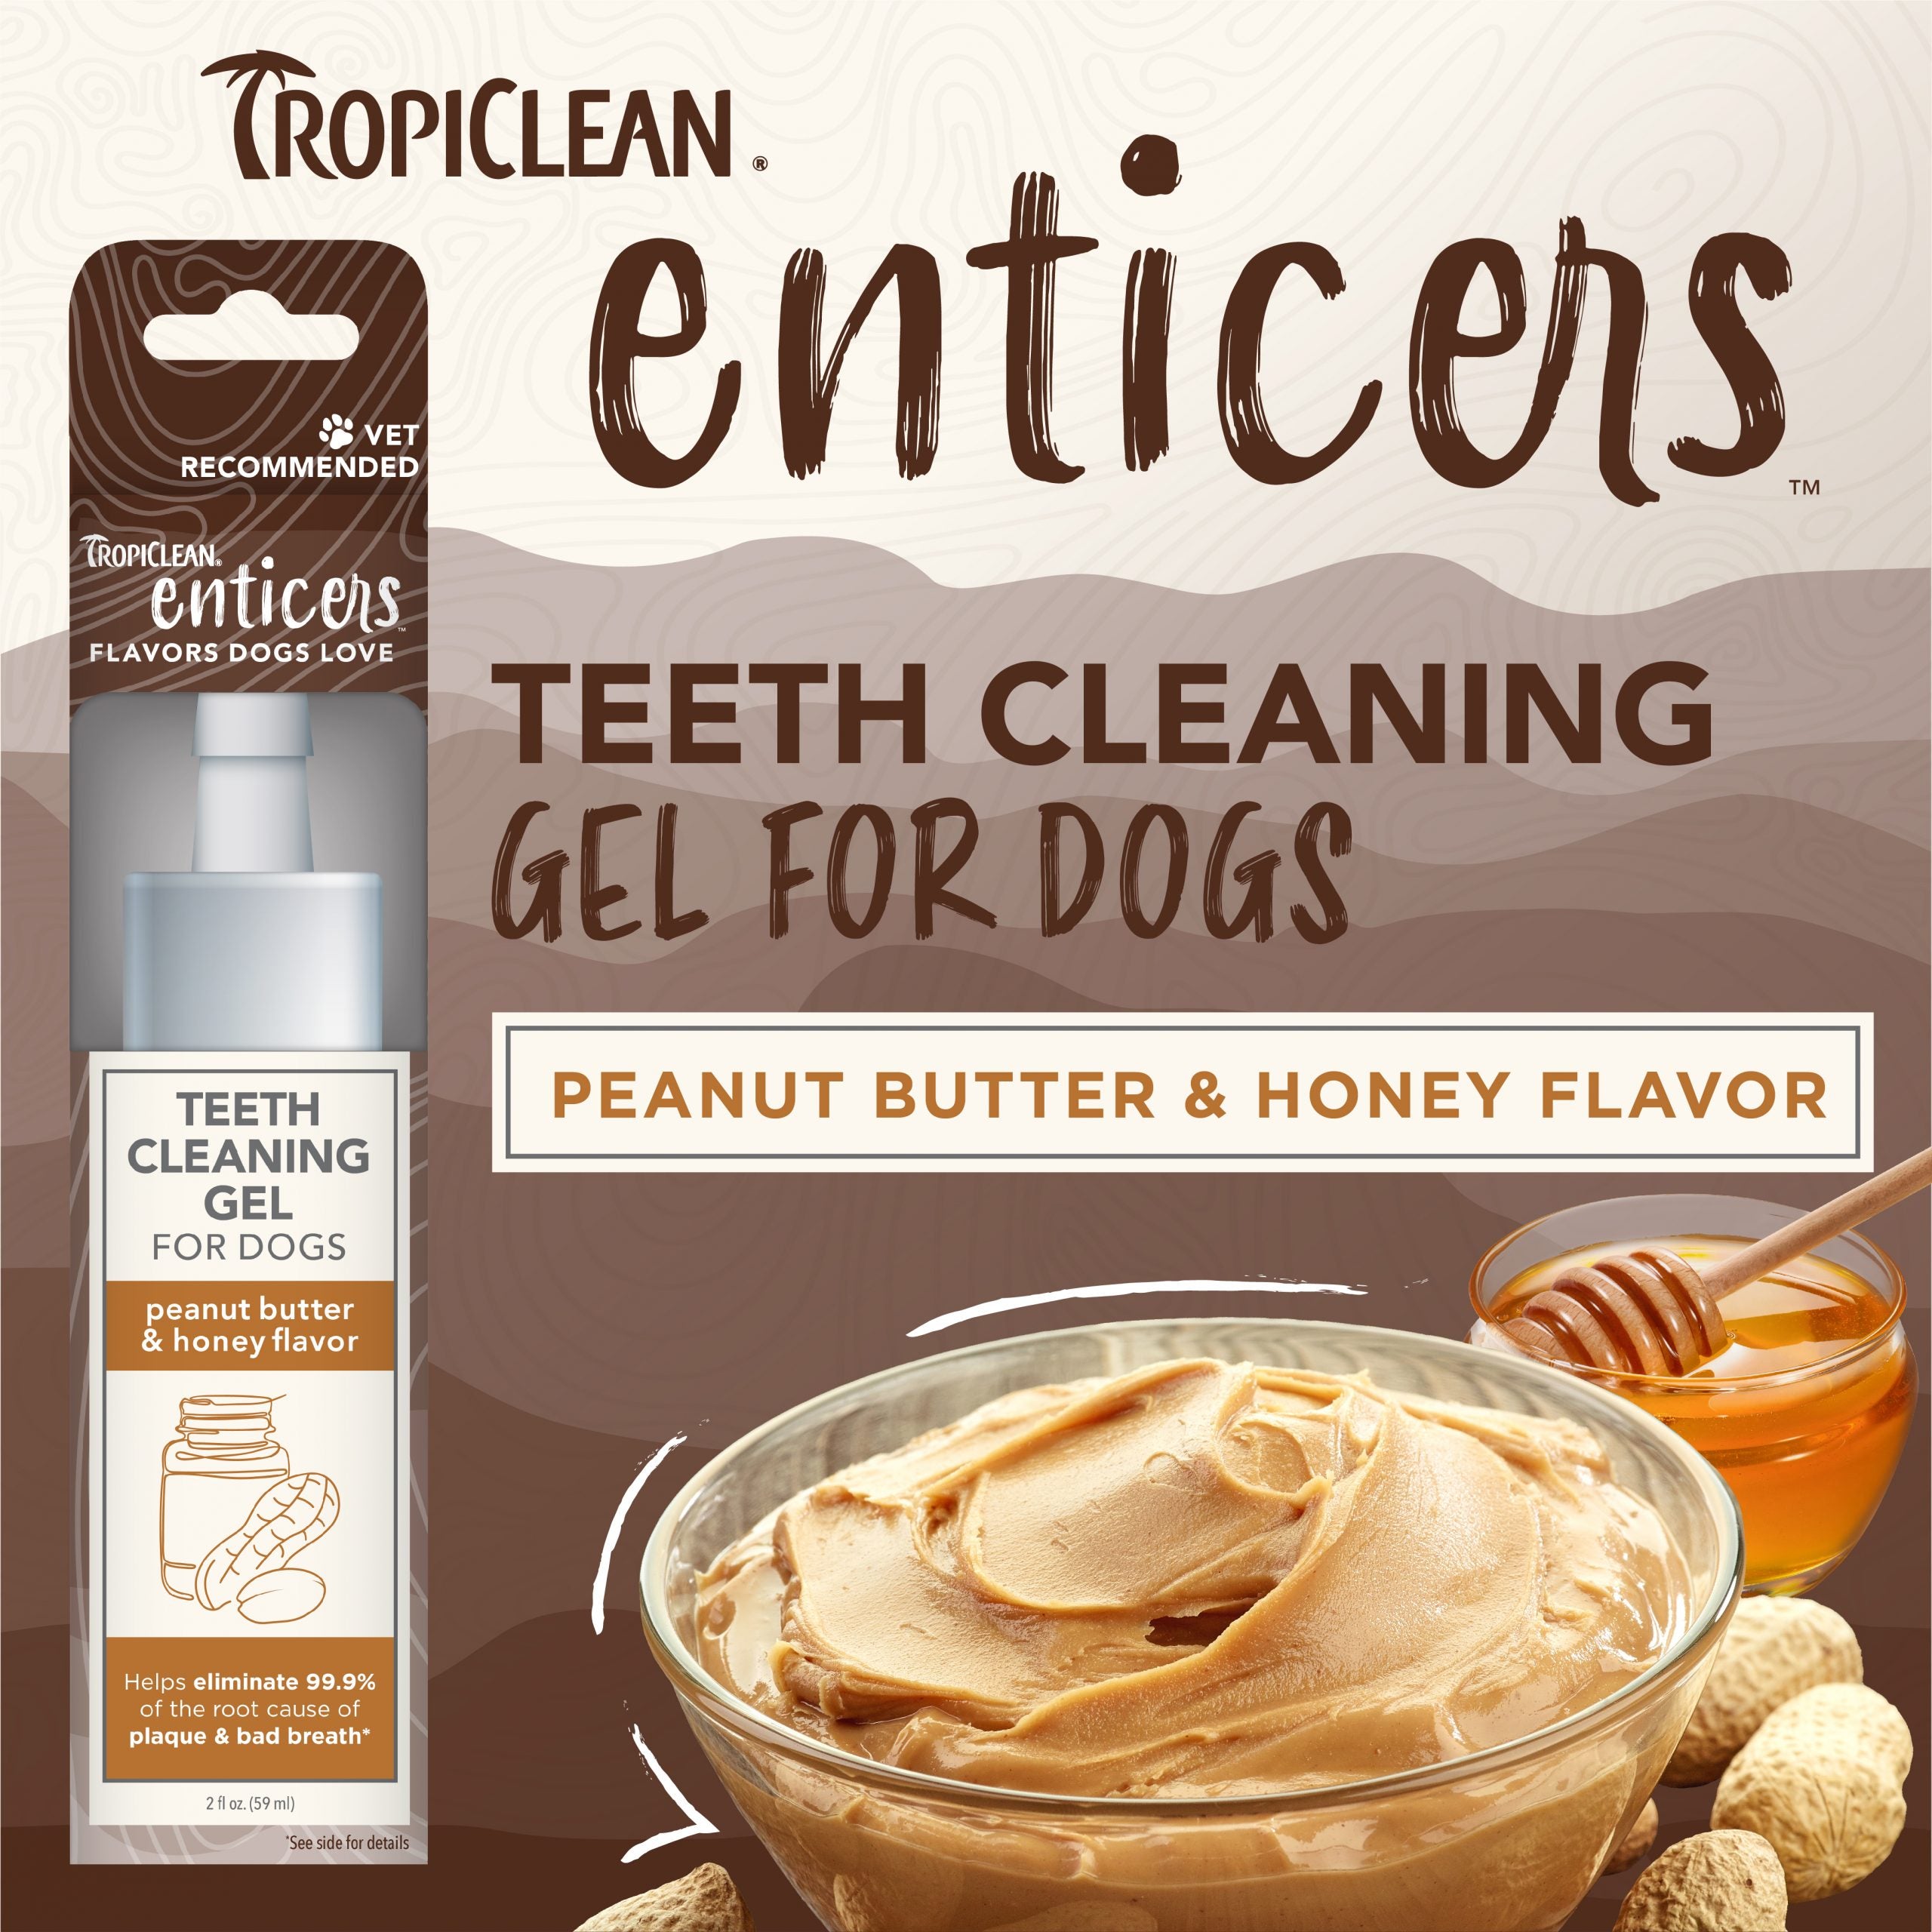 TropiClean Enticers Teeth Cleaning Gel for Dogs Peanut Butter and Honey 59ml